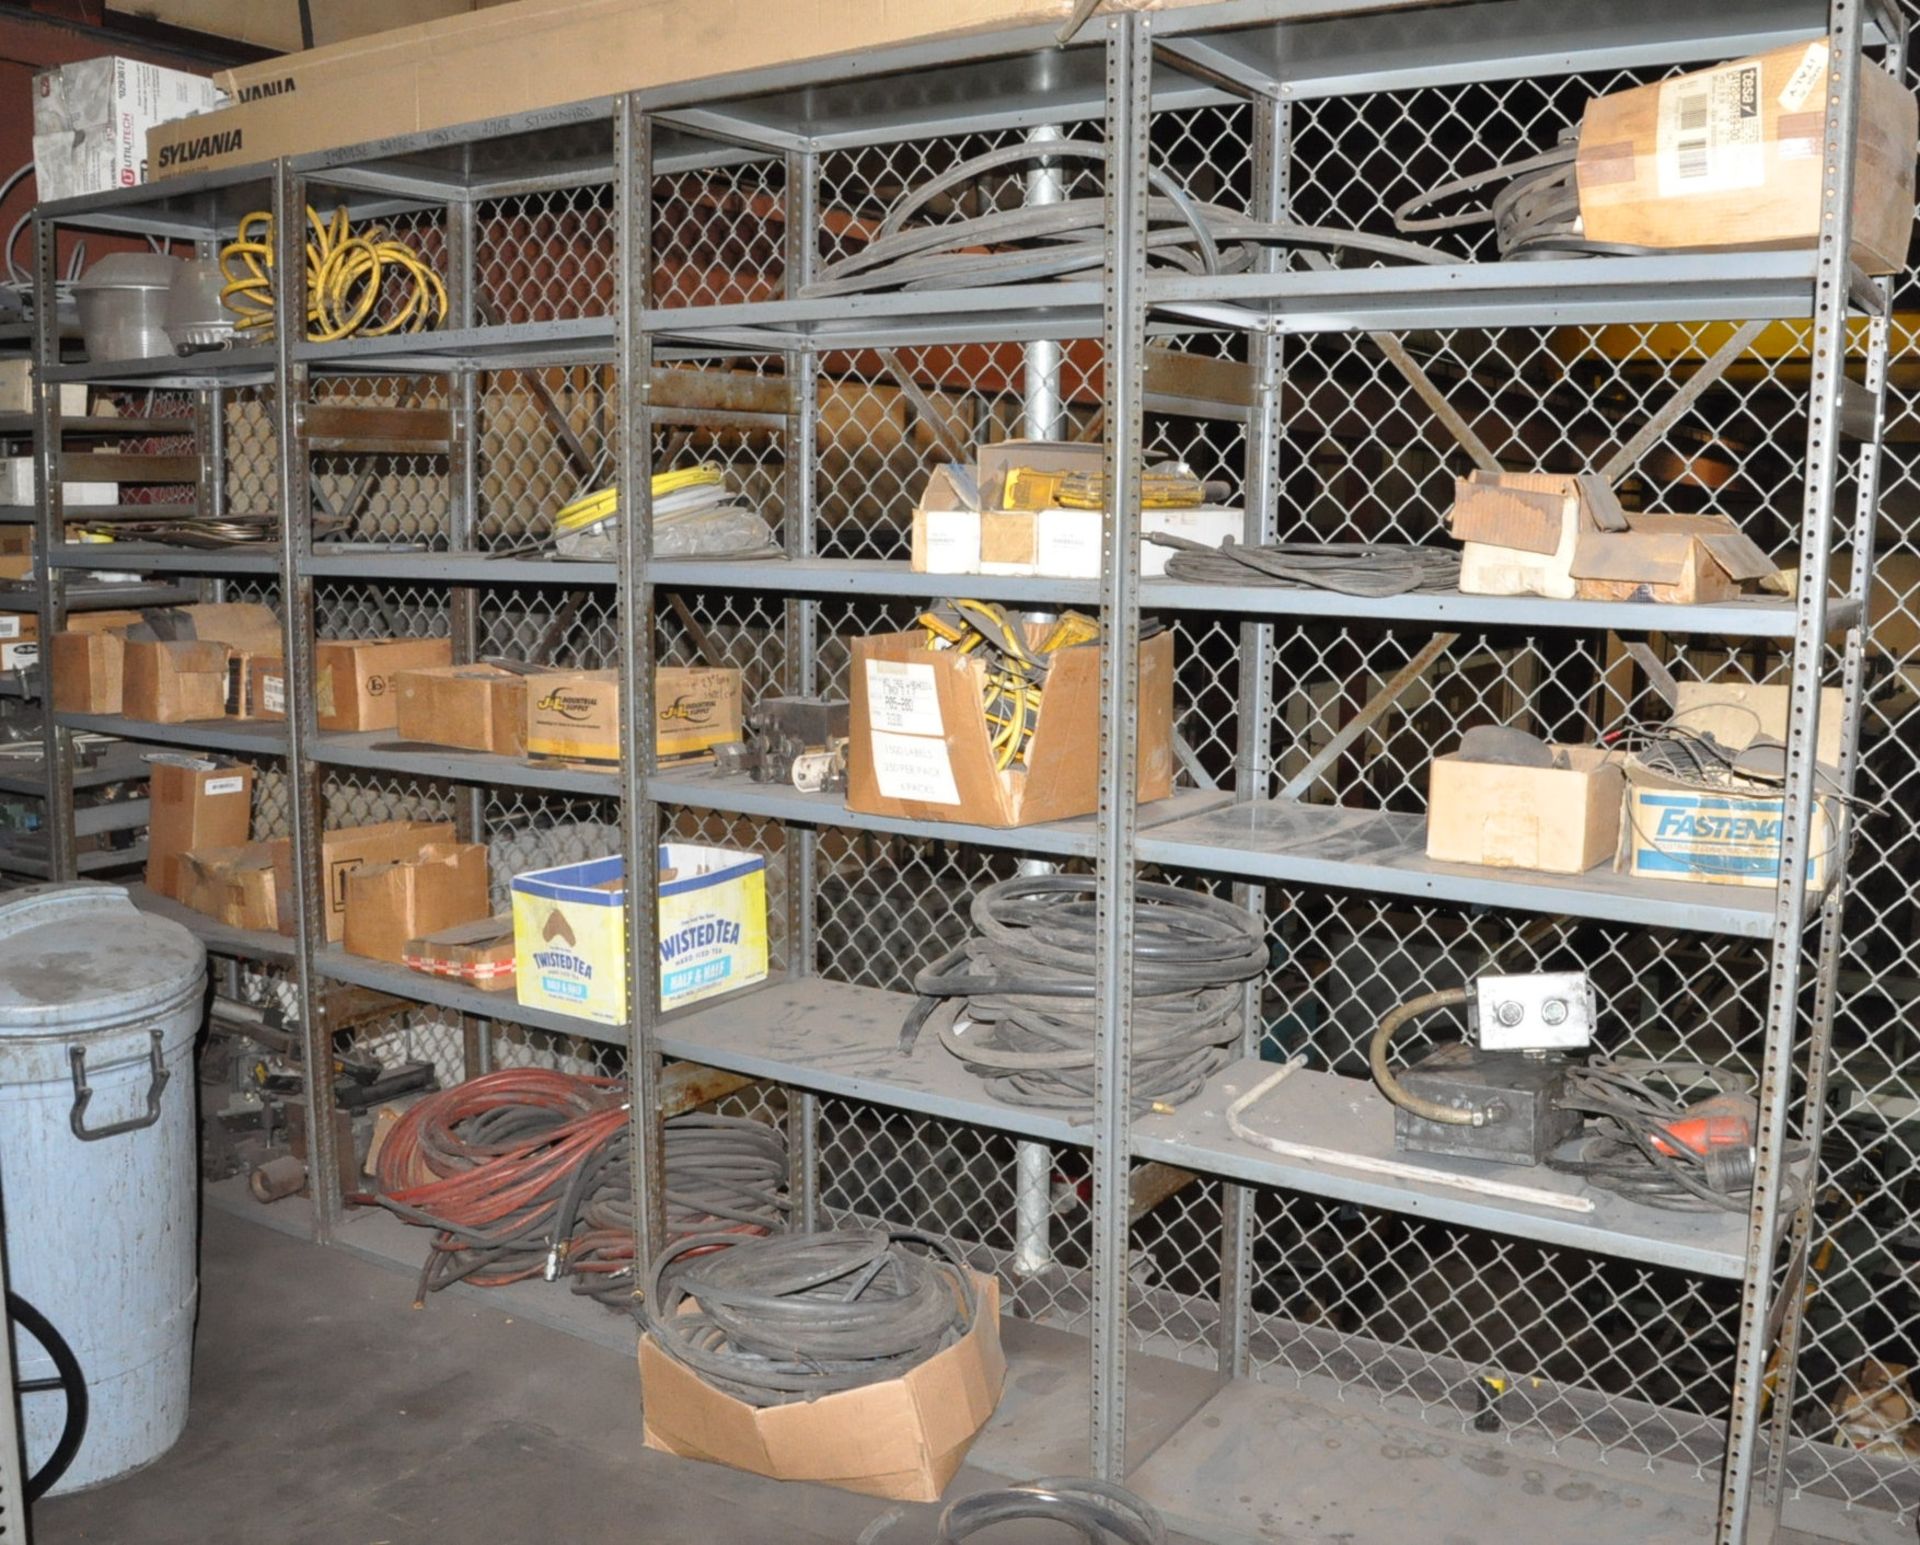 Lot-(21) Sections Shelving, (Contents Not Included), (Upstairs on Mezzanine) - Image 5 of 6